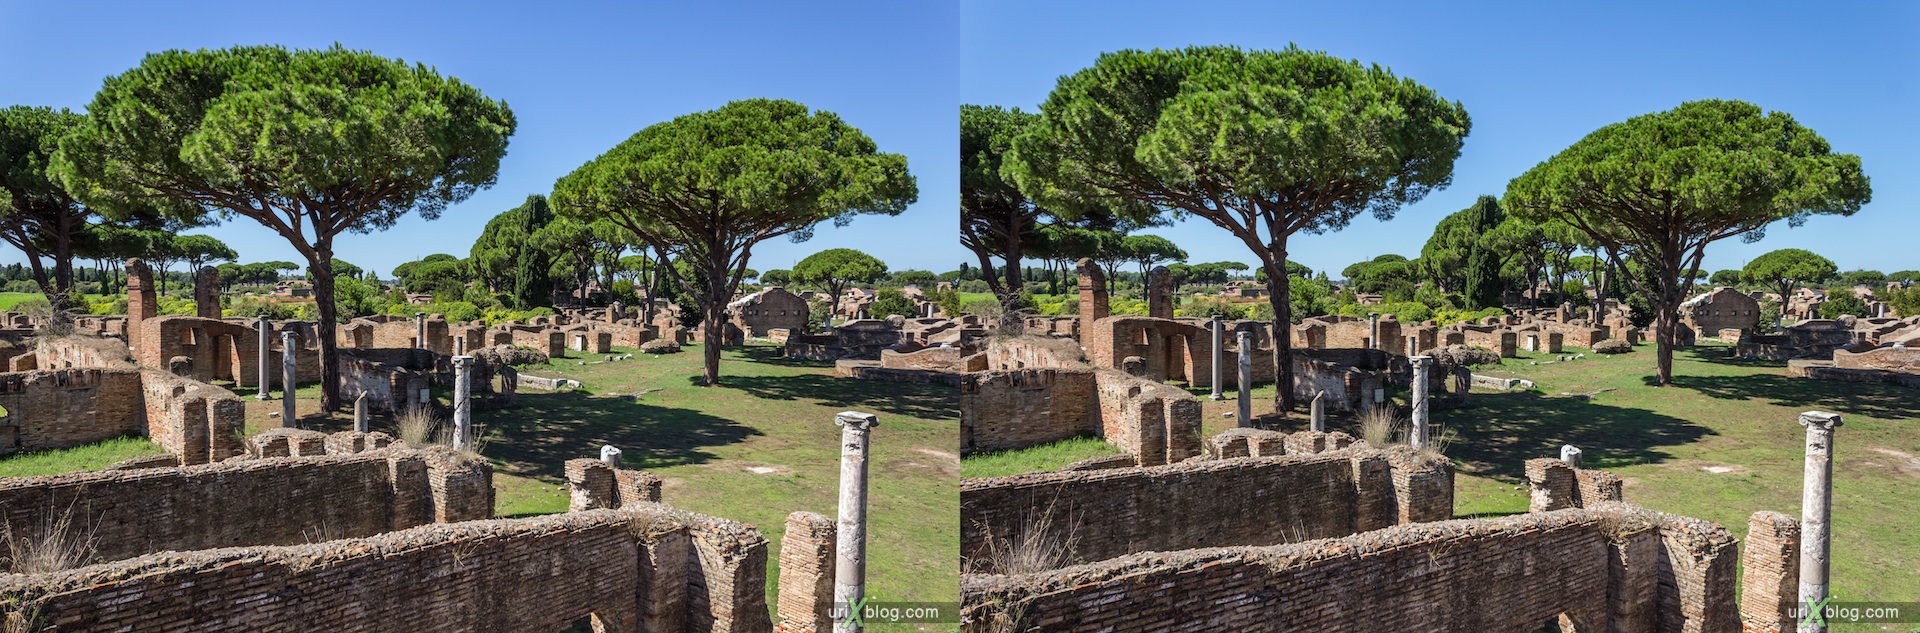 2012, Ostia Antica, Rome, Italy, ancient rome, city, 3D, stereo pair, cross-eyed, crossview, cross view stereo pair